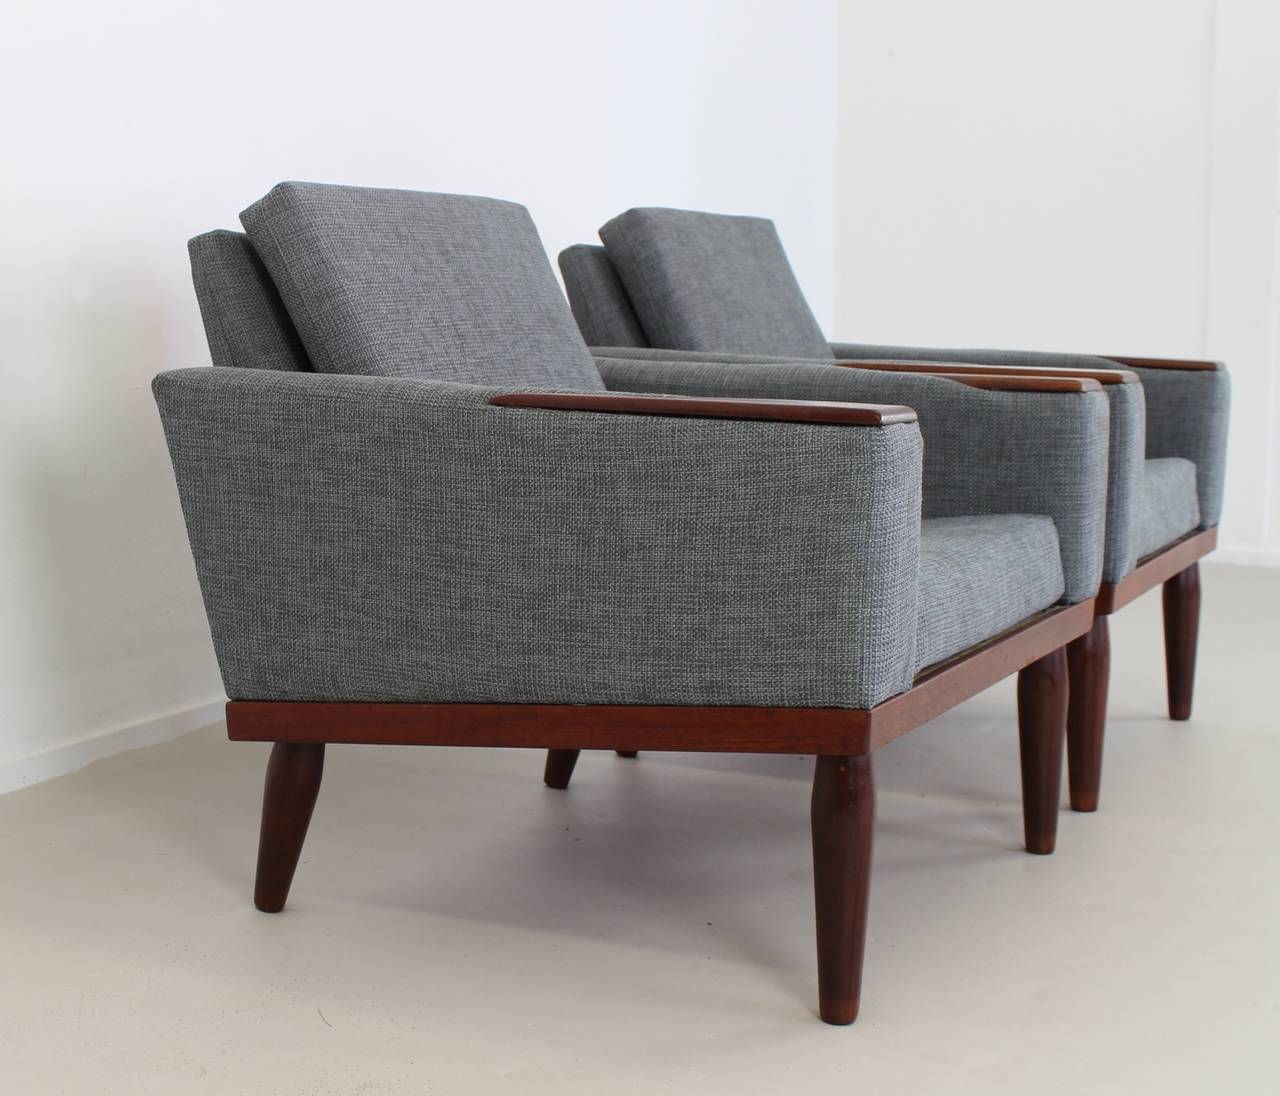 Beautiful early 1960s seating group.
Danish design and manufacturing.
Marked with Bovenkamp.
Four seating couch.
Two clubs all with teak panels on the armrests.
Clubsize dimensions: 76 x 74 x 72cm (W x D x H).
Seating height: 37cm.